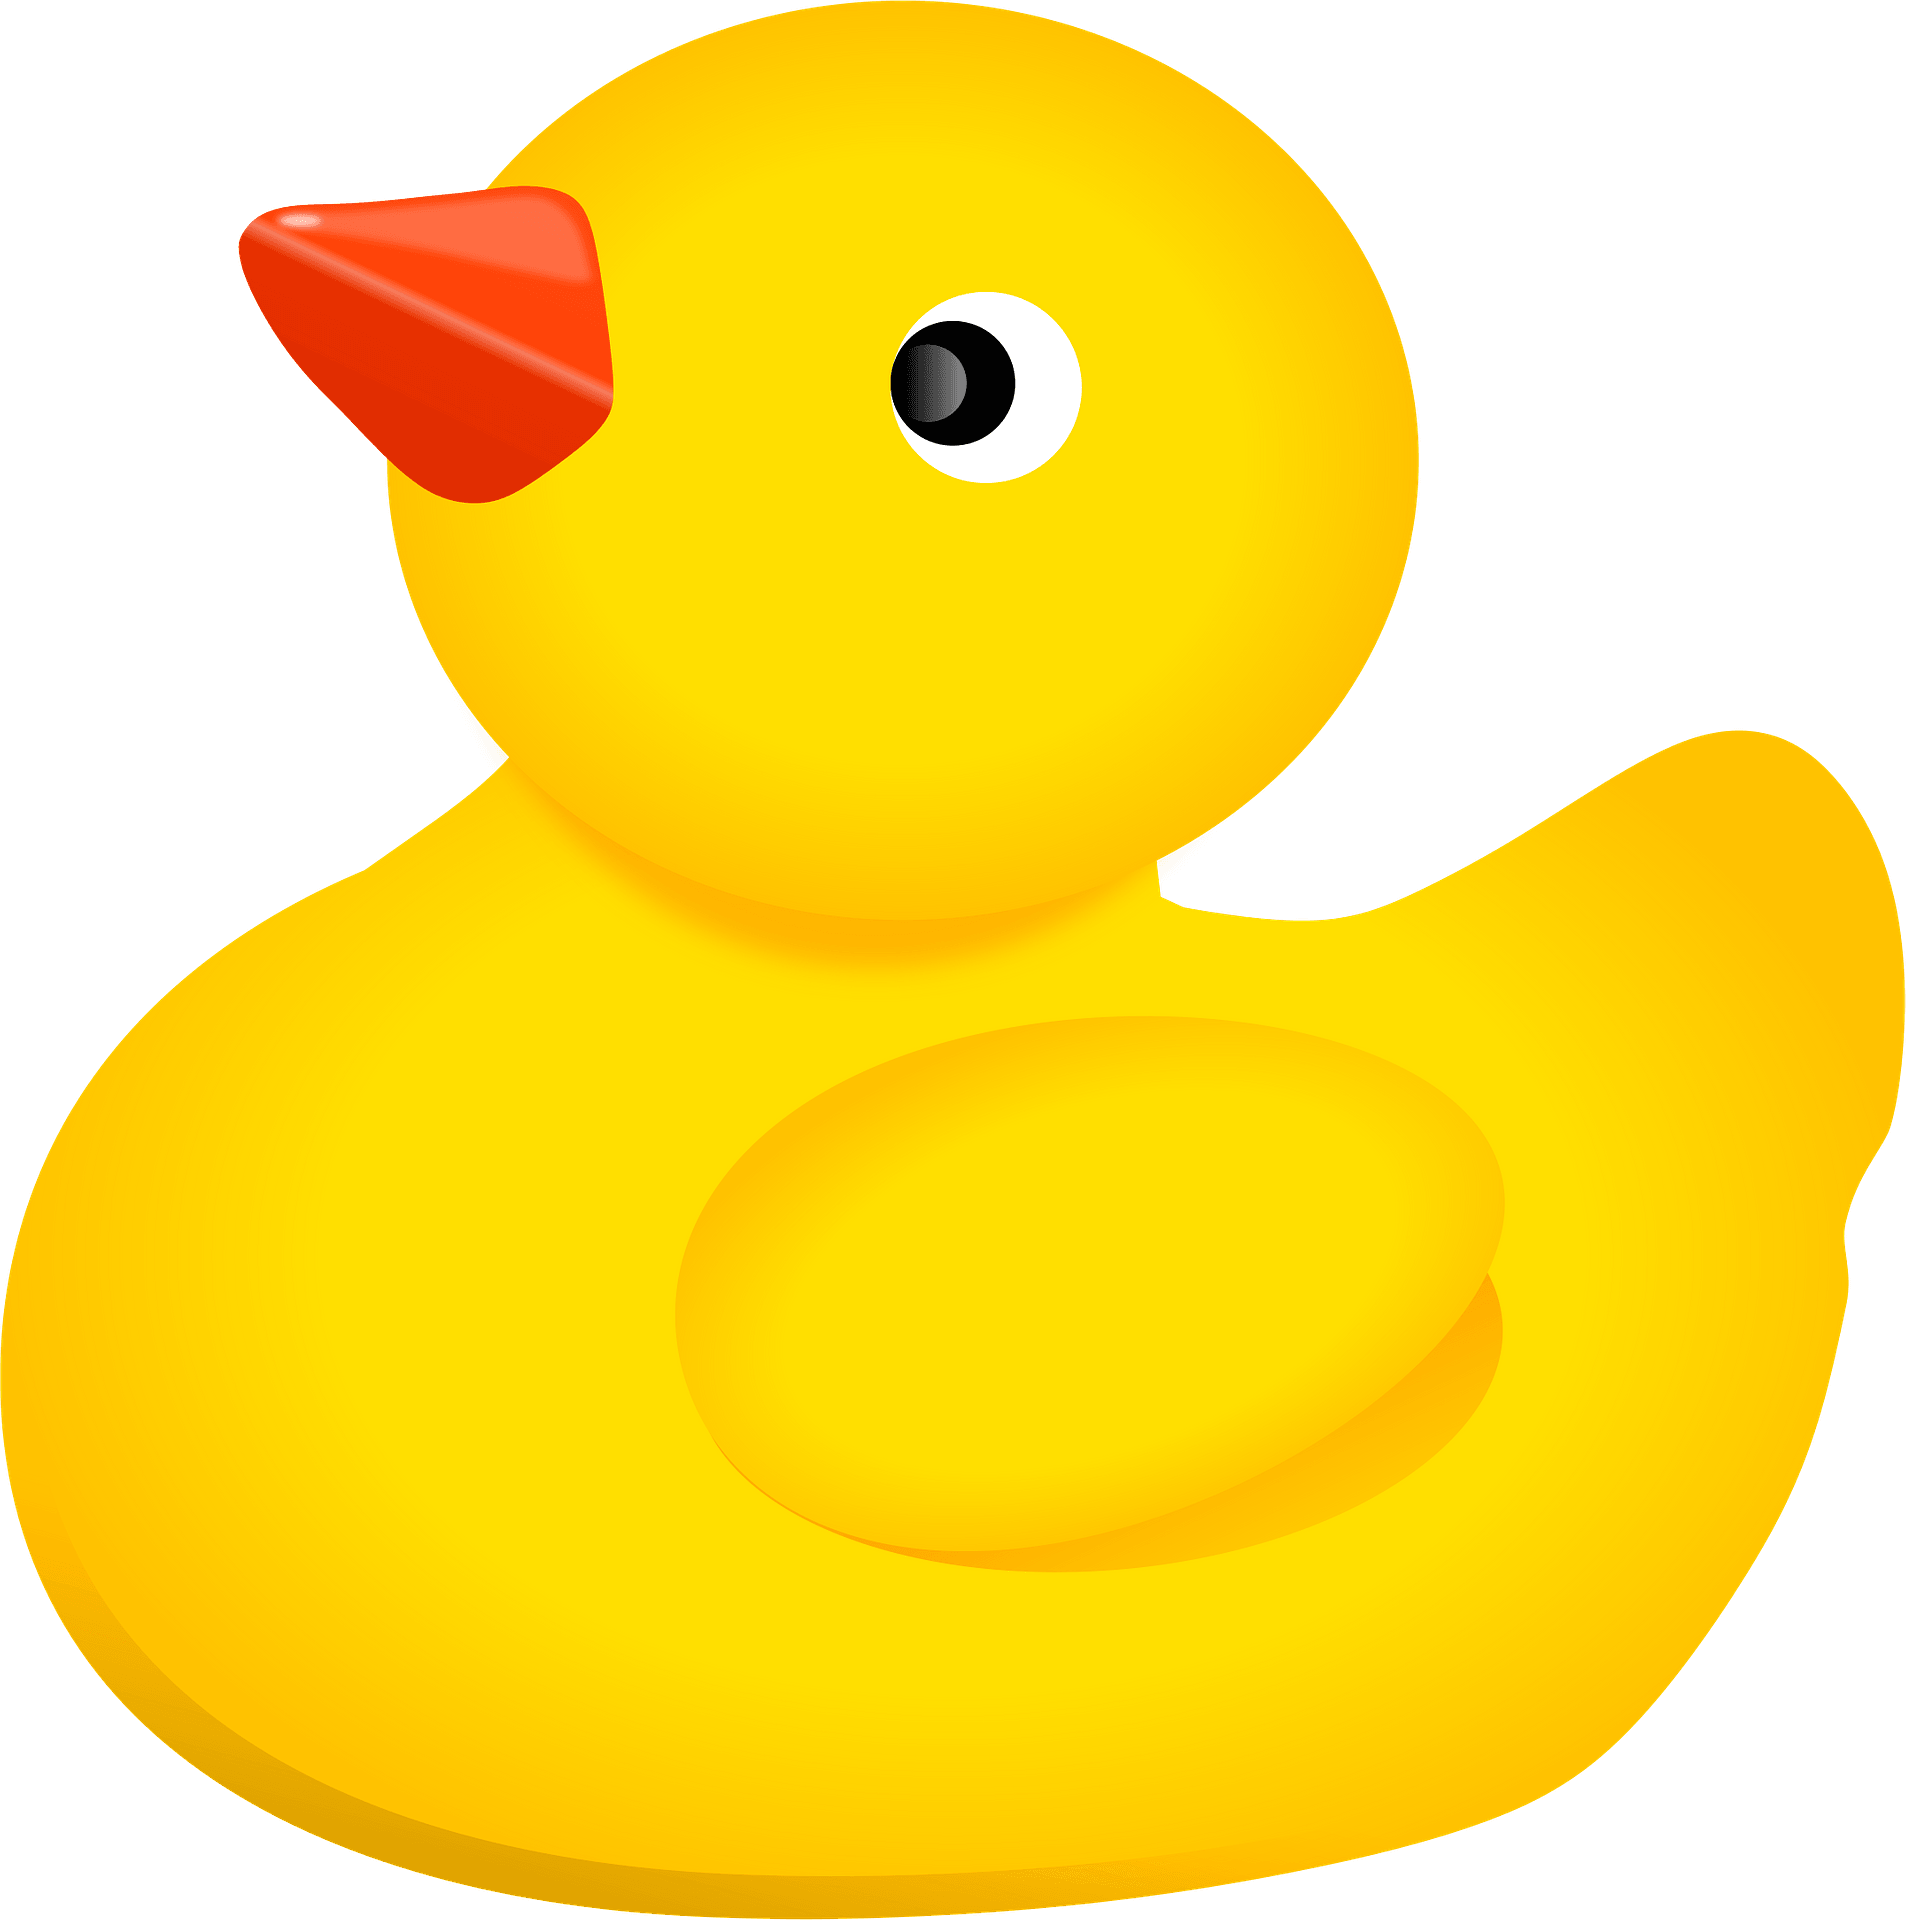 rubber-duck-stock-illustration-download-image-now-rubber-duck